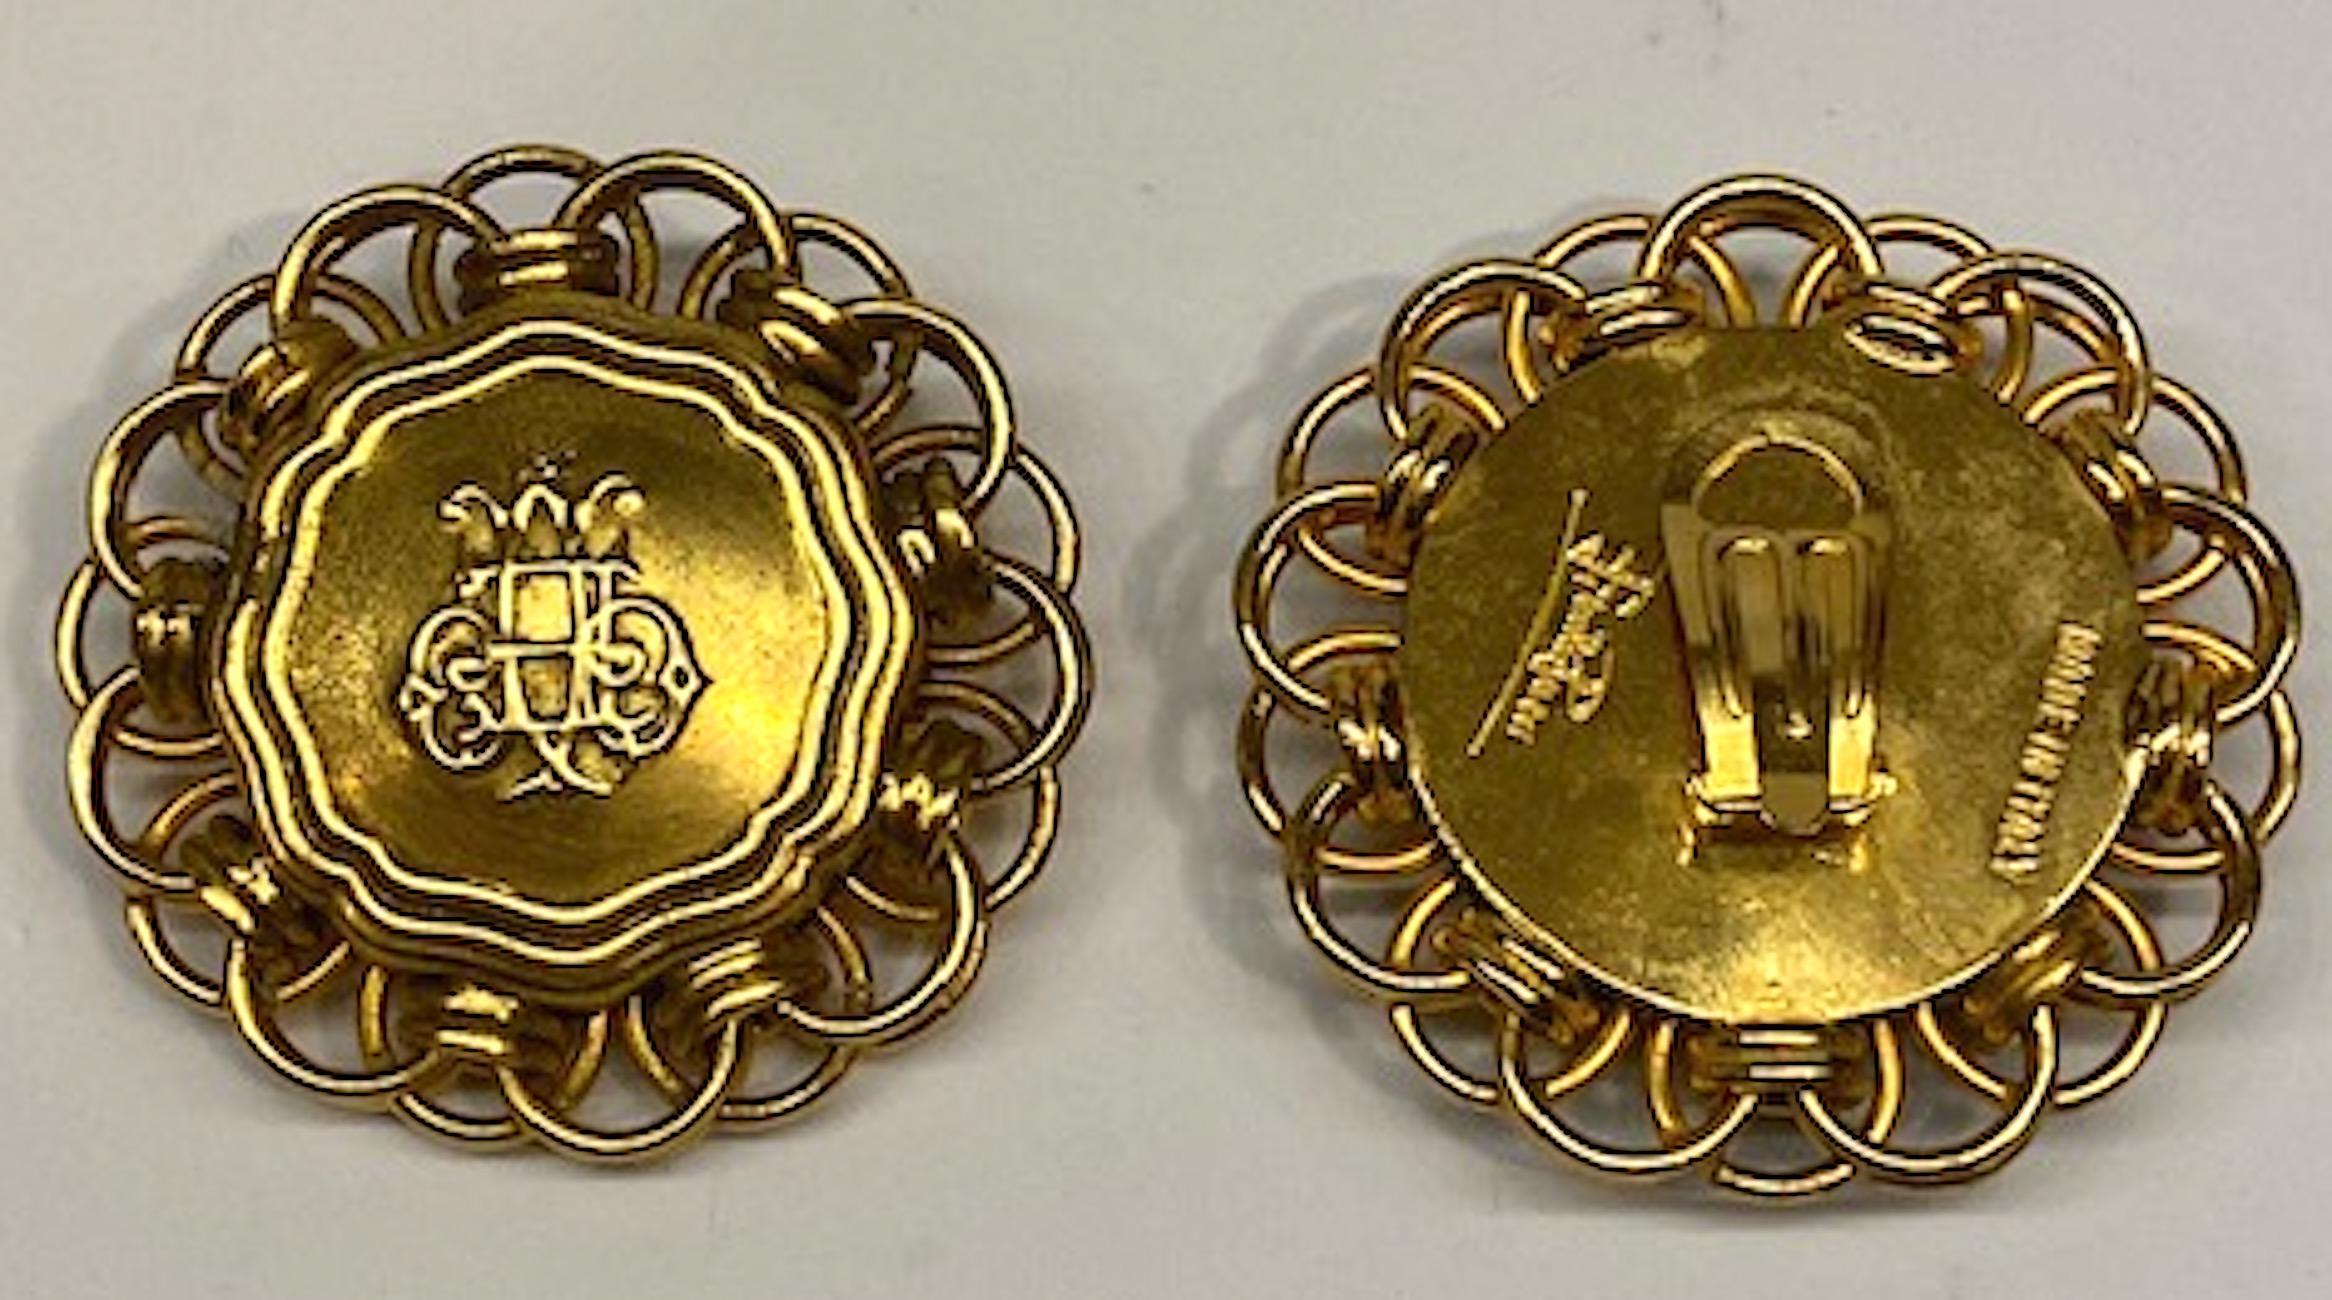 A large pair of 1980s statement satin gold tone button earrings by iconic fashion house Emilio Pucci. Each earring measures 2 inches in diameter. The front button measures 0.38 deep. Central medallion has a scrip combination of the letters E and P